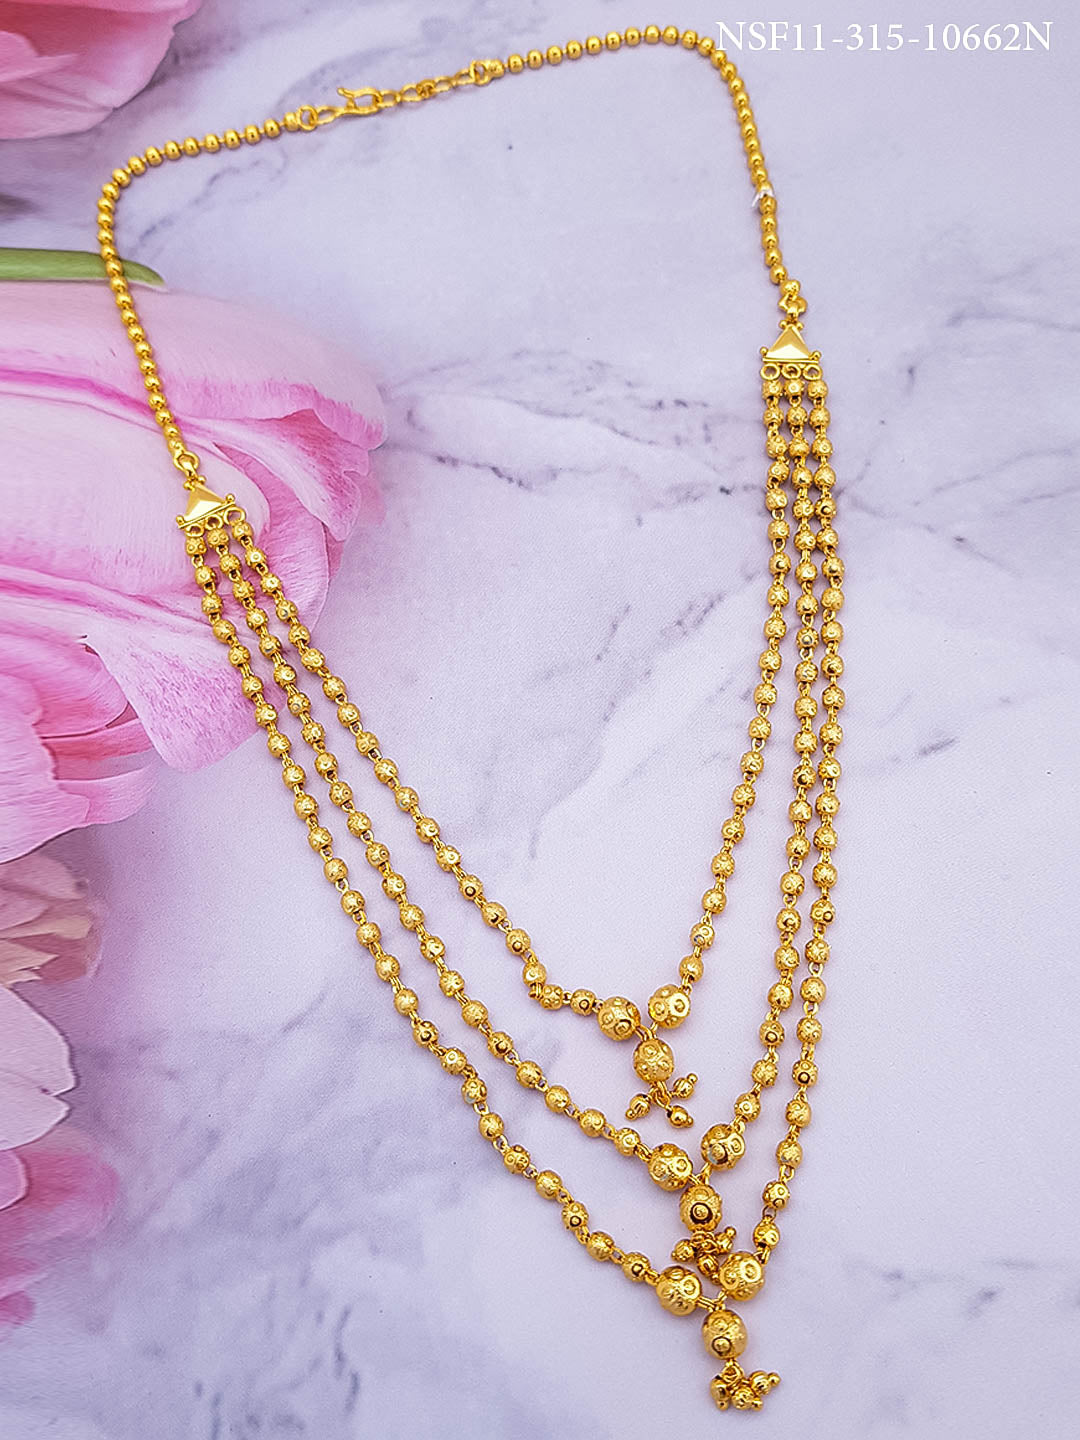 1 gm Microgold plating golden bead Rajkot chain 18 inches 3layers10662N